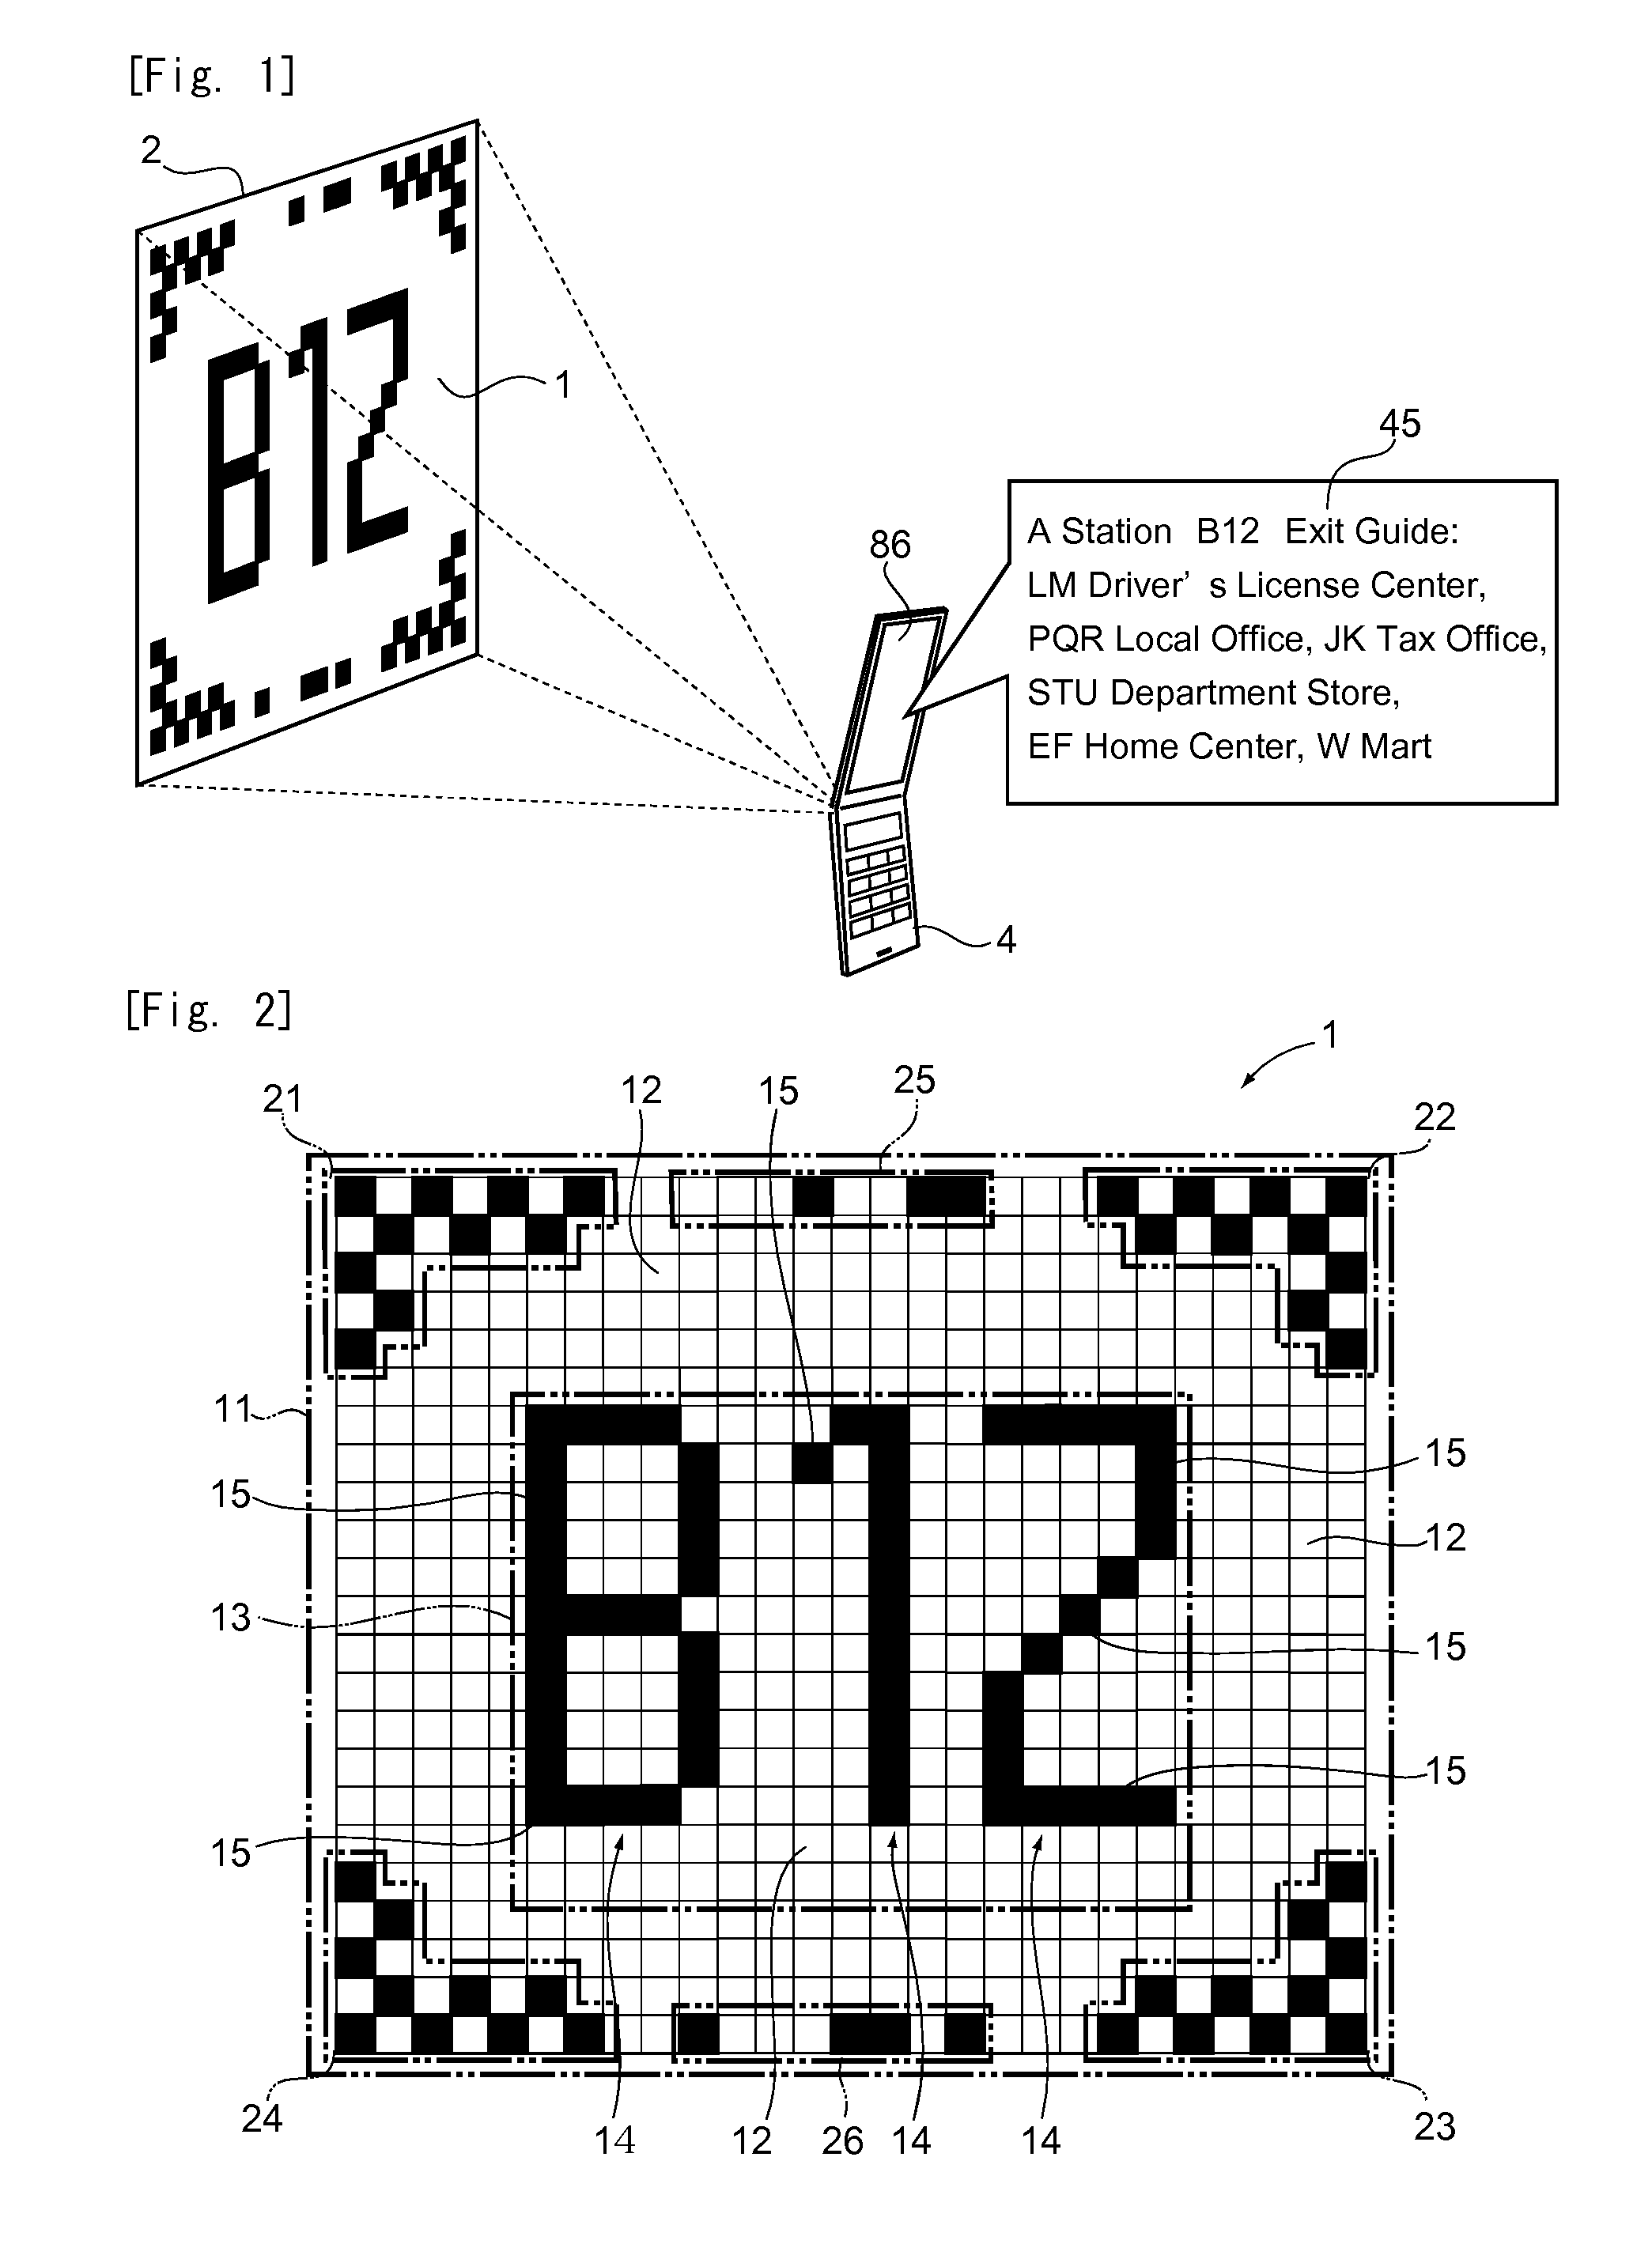 Article with visual code, visual code generating apparatus and information conveying method